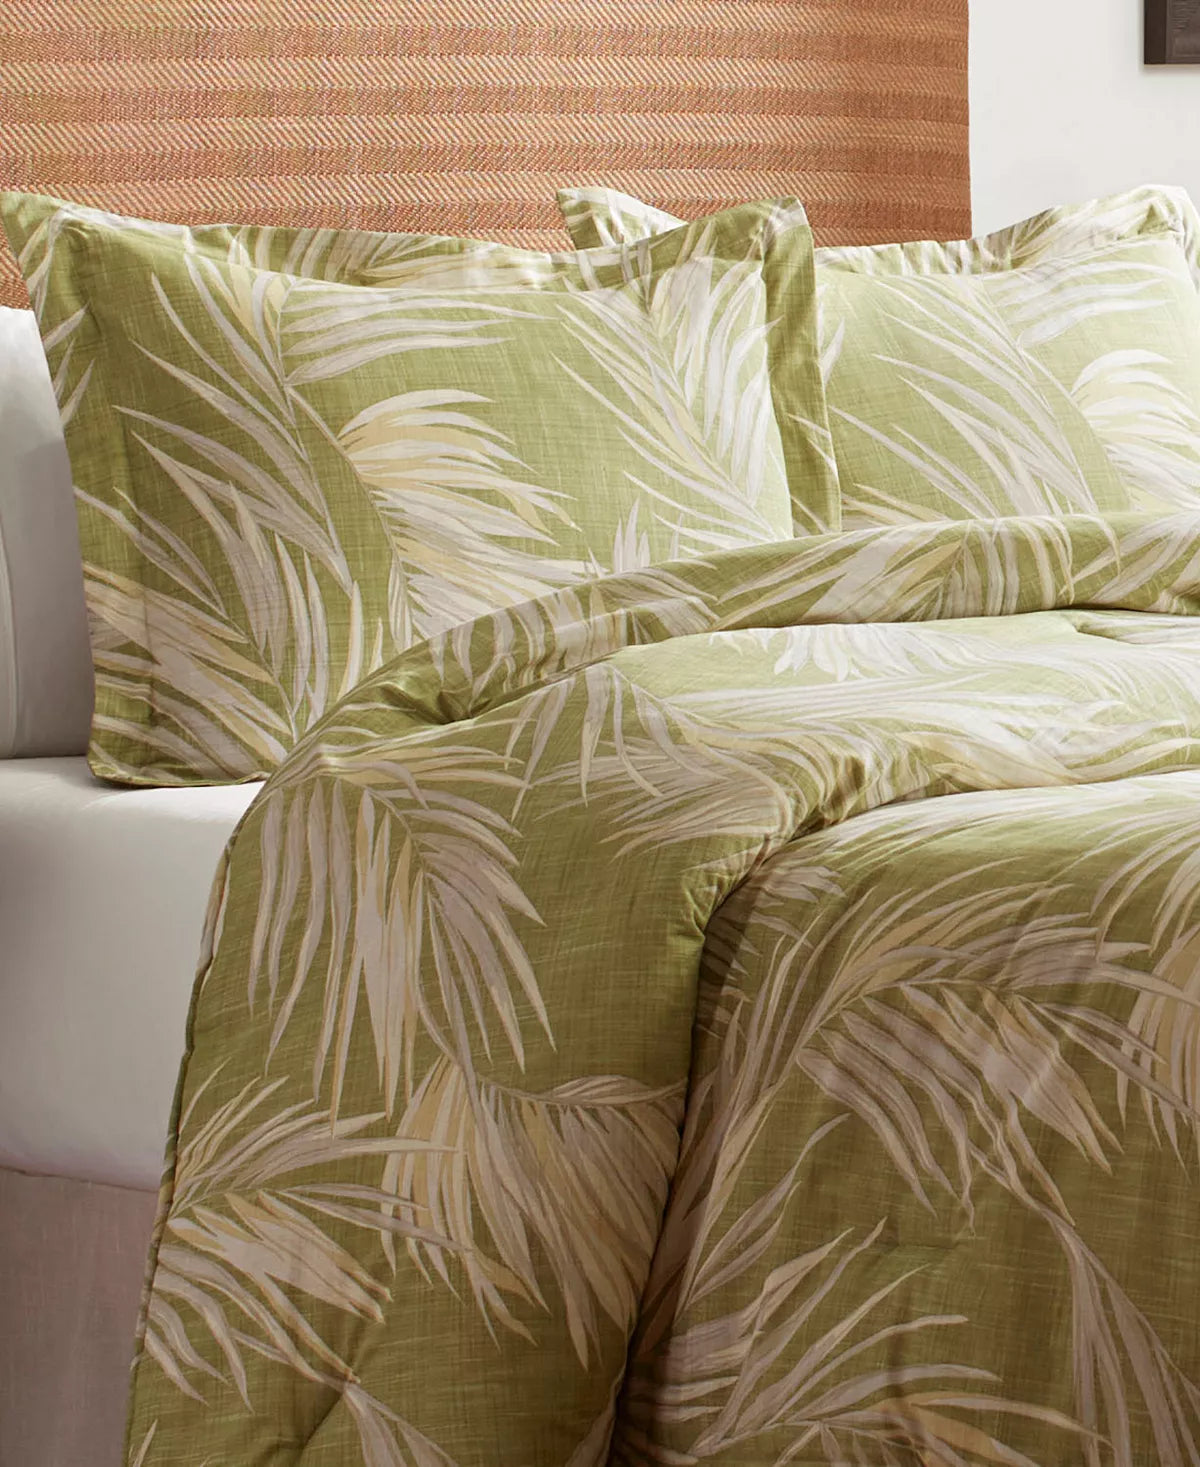 Tommy Bahama Canyon Palms Queen Comforter Set